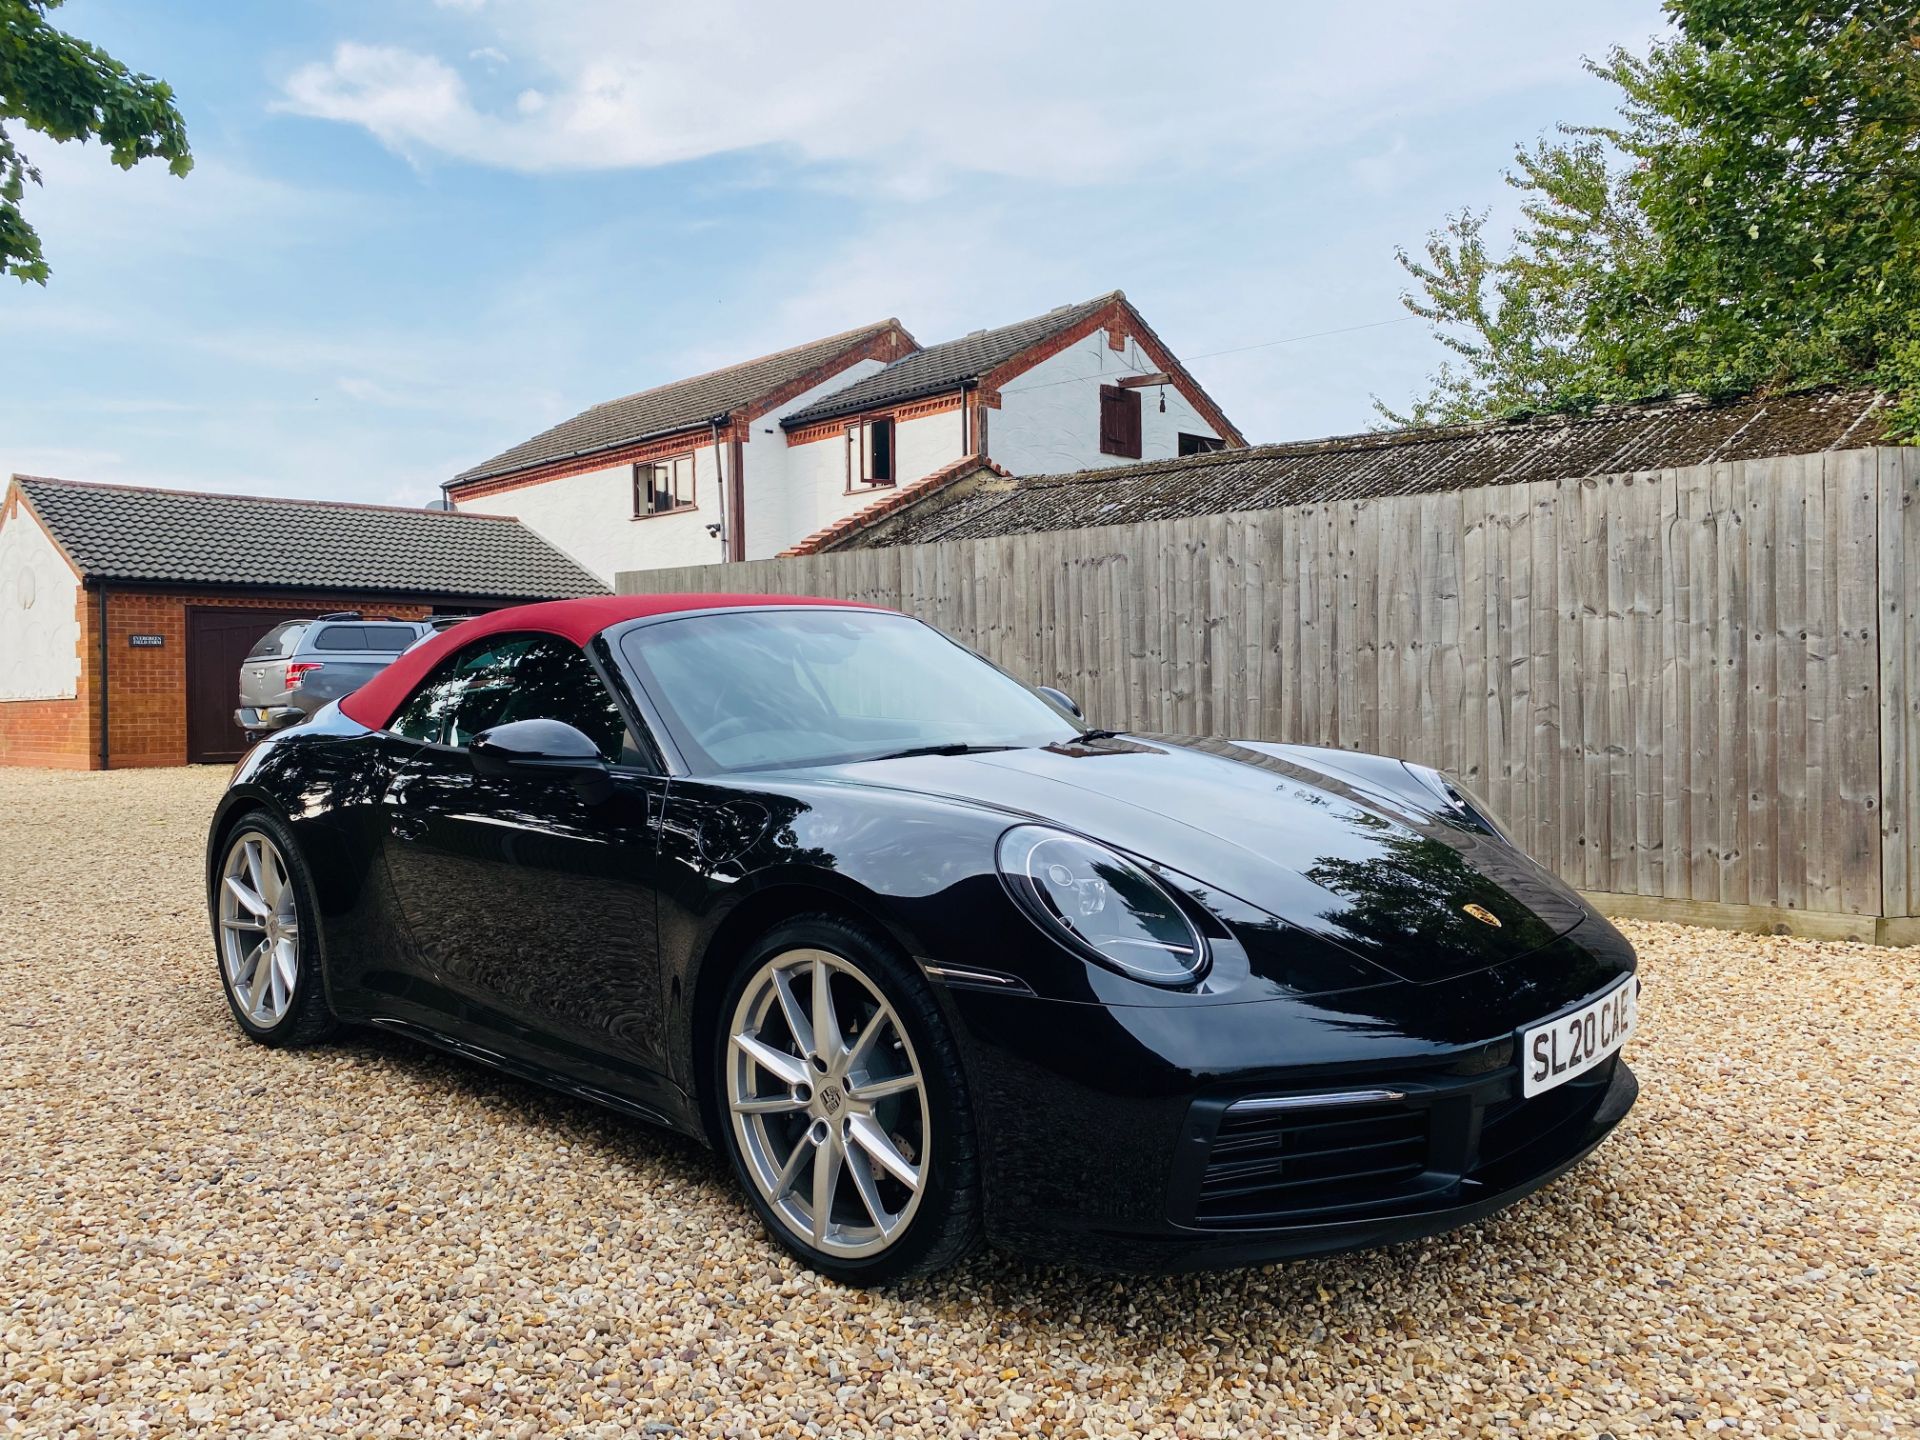 PORSCHE 911 S-A (992) CABRIOLET - 20 REG - CHRONO PACK - SPORTS EXHAUST - ALL NEW MODEL - WOW!!!! - Image 16 of 39